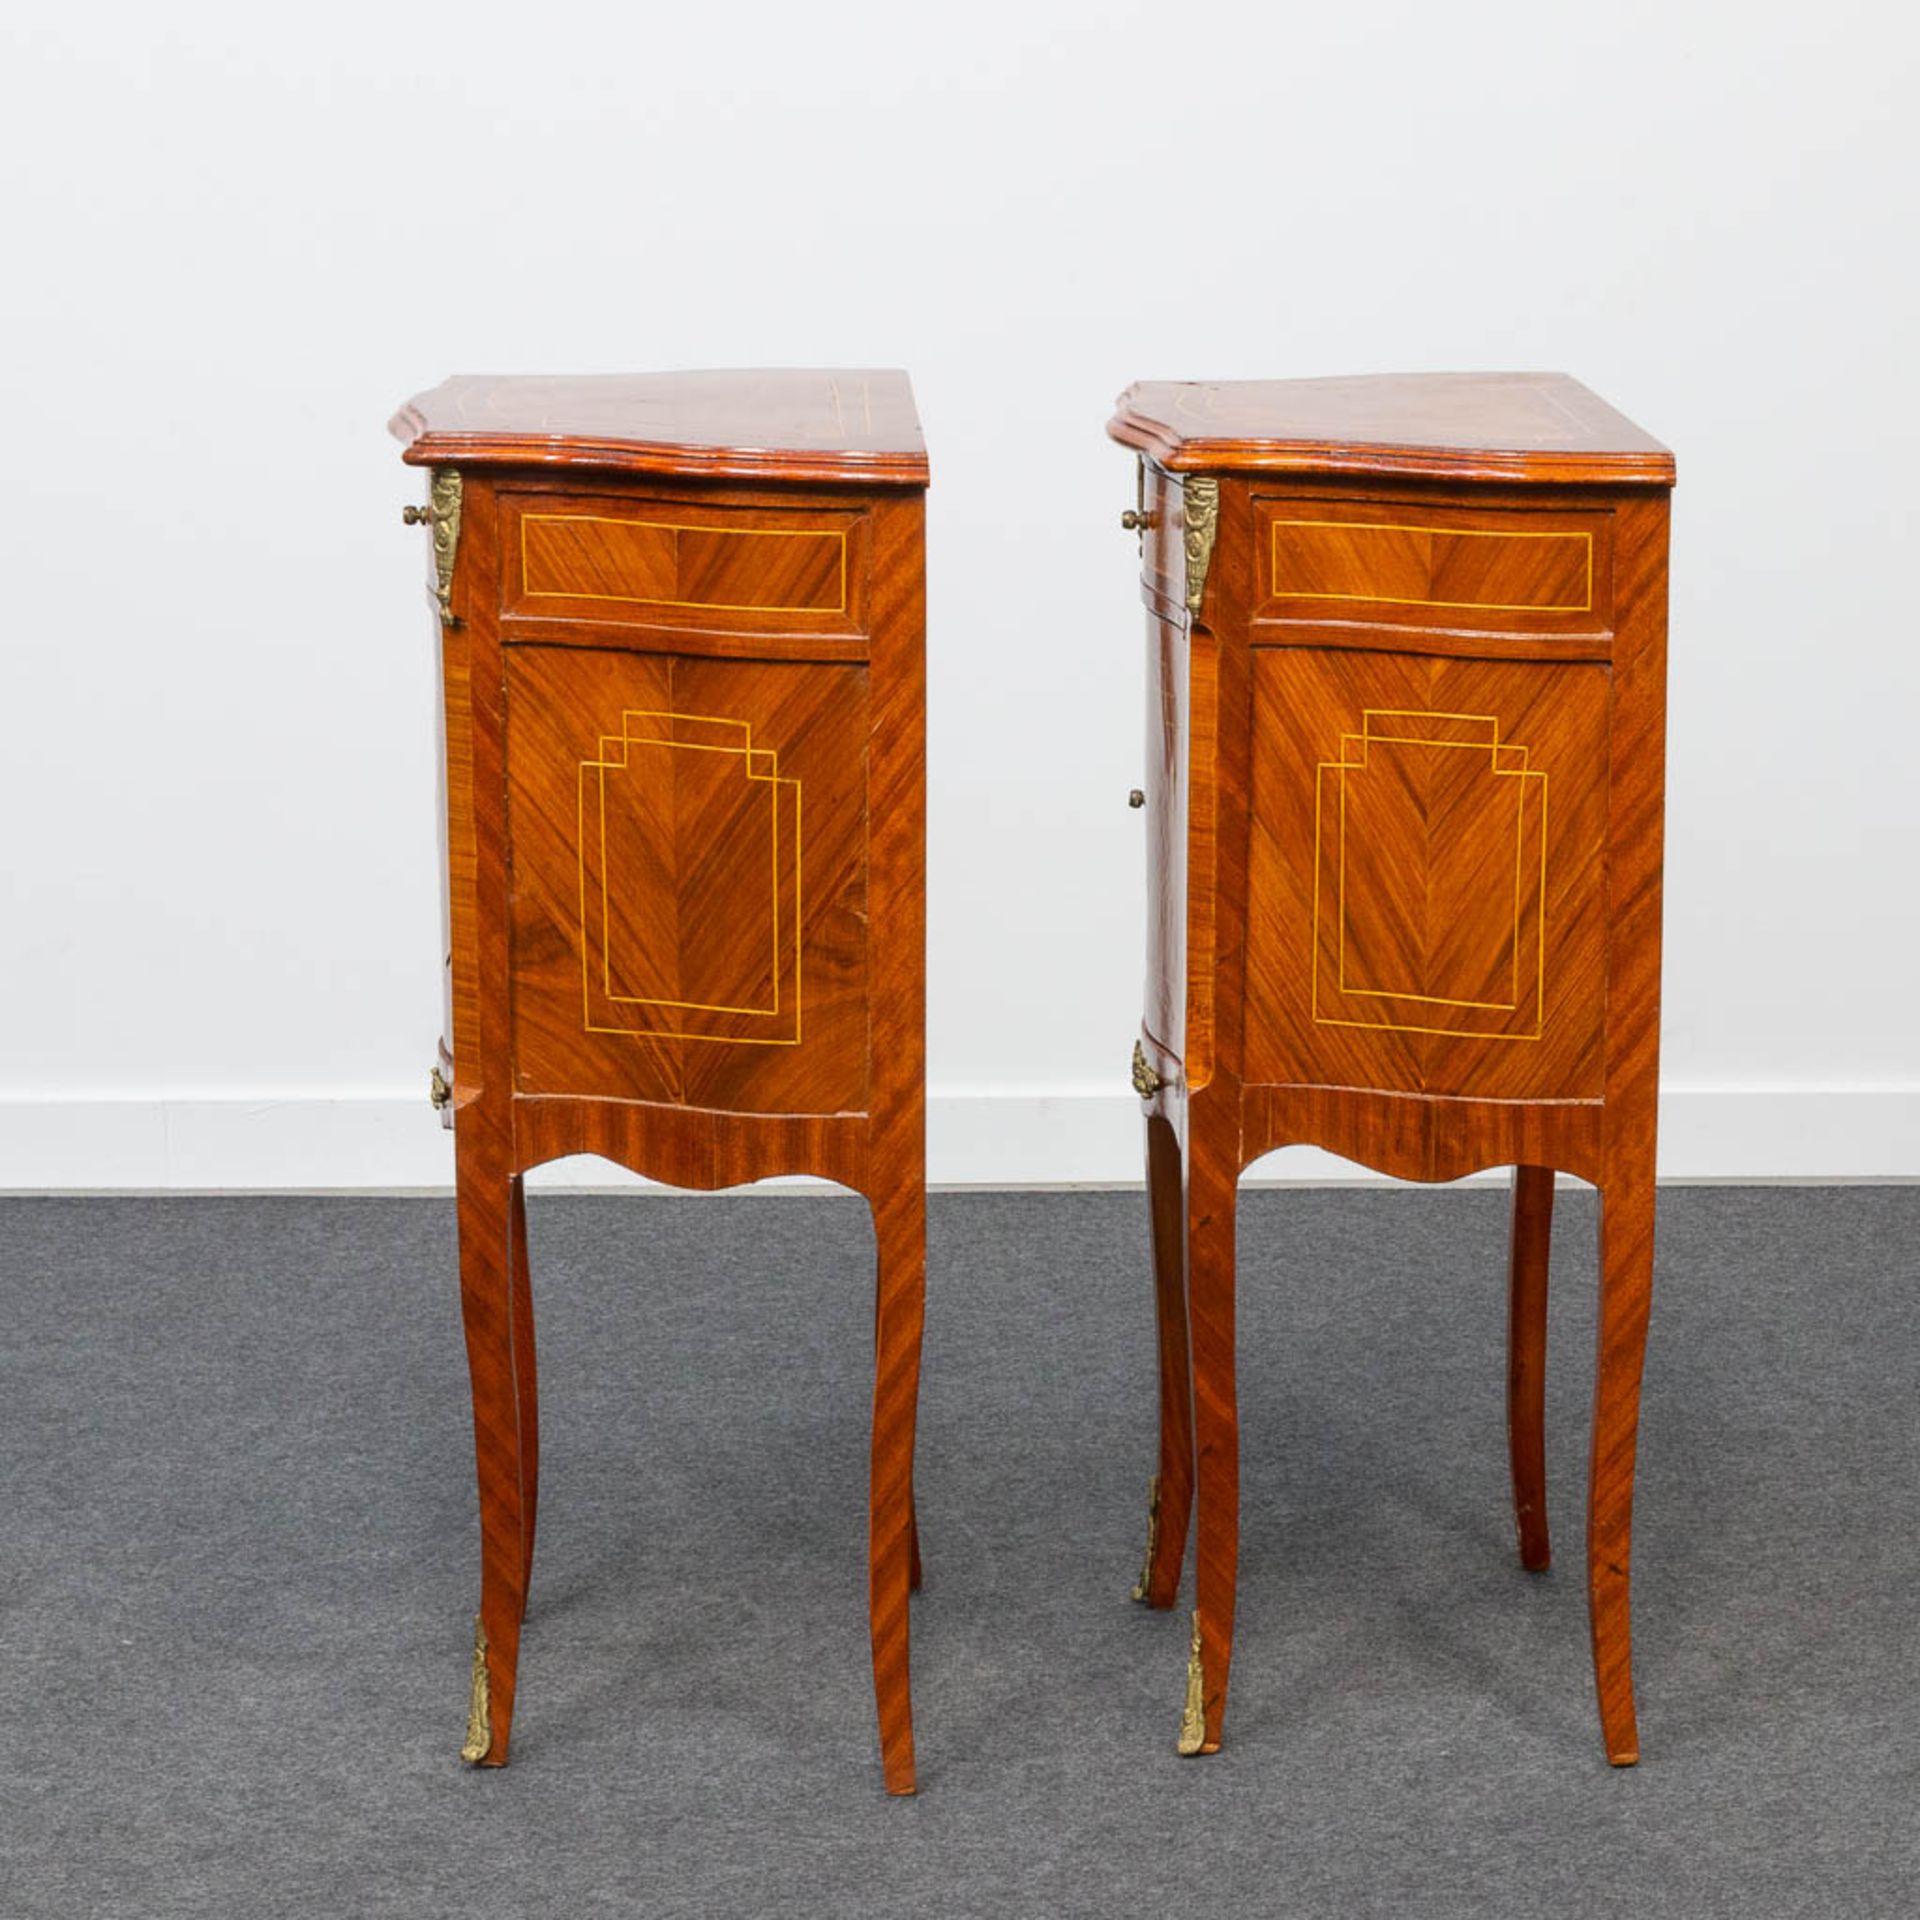 A pair of bronze mounted nightstands, inlaid with marquetry. Second half of the 20th century. - Image 12 of 22